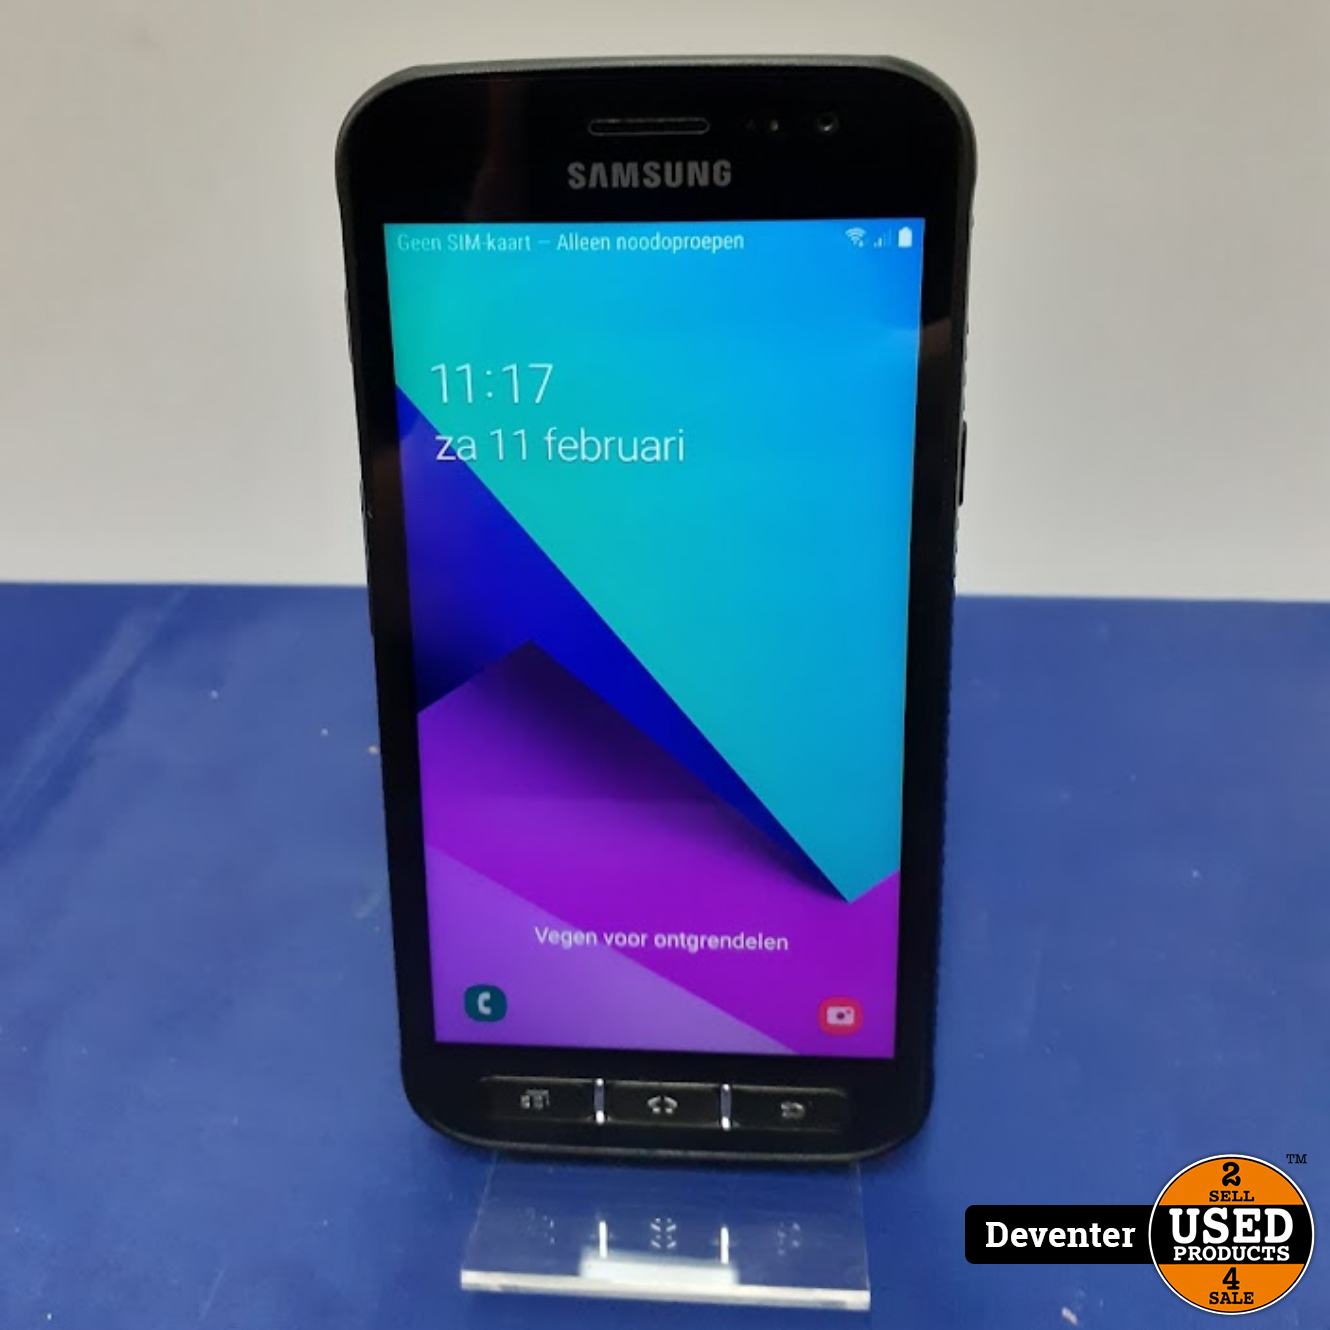 Remmen Smelten vacature Samsung Galaxy Xcover 4 16gb || Android 8 - Used Products Deventer